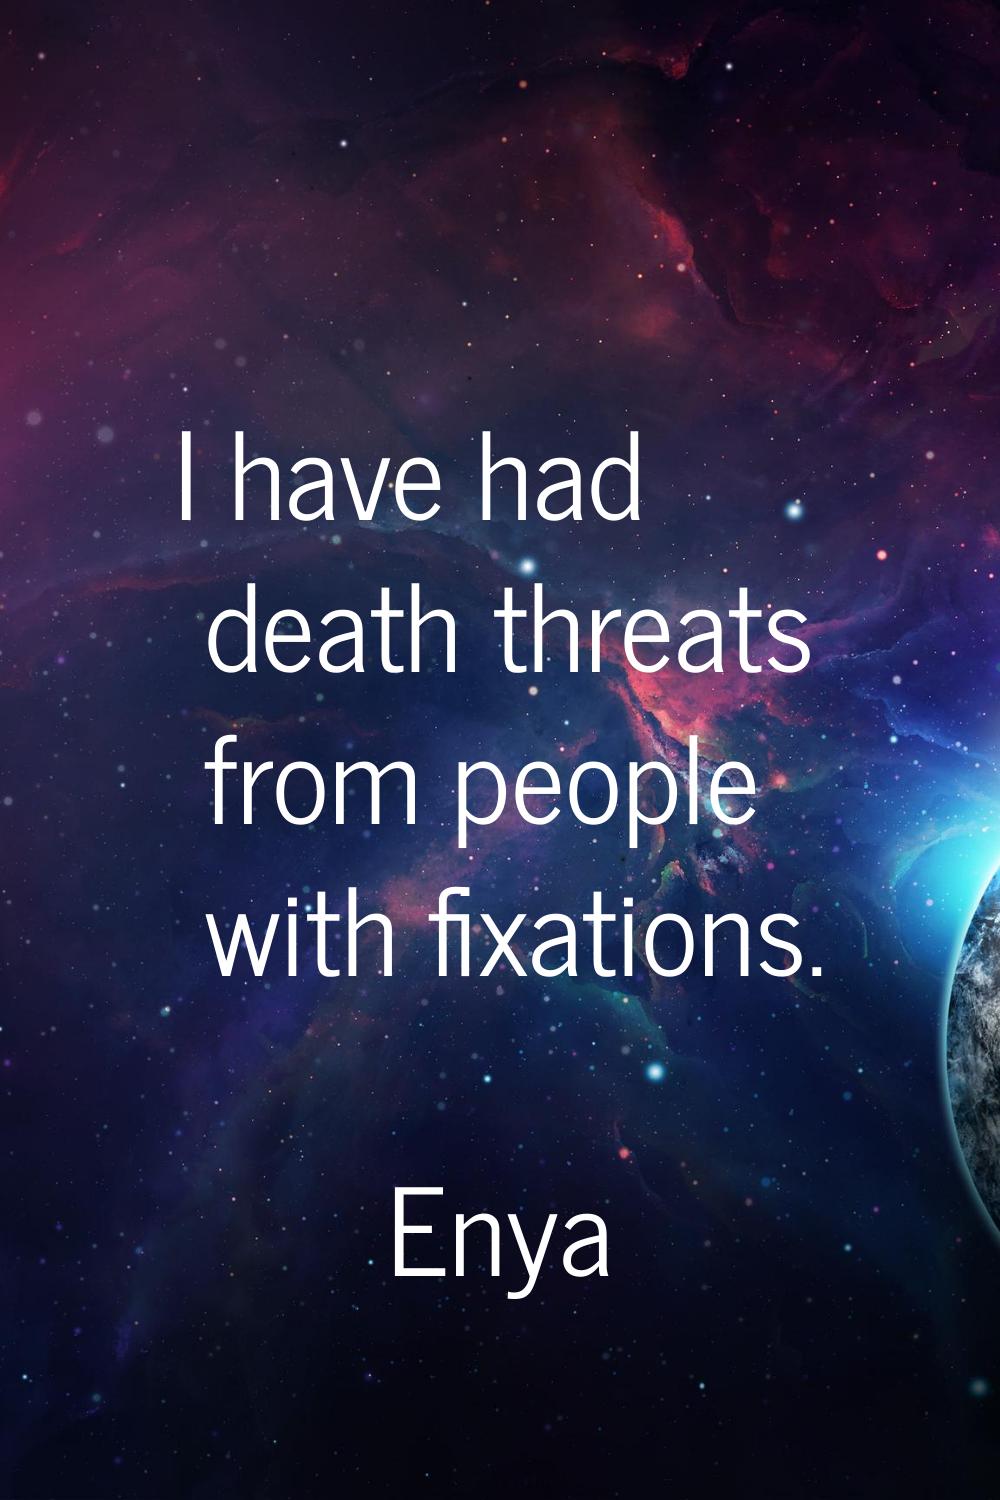 I have had death threats from people with fixations.